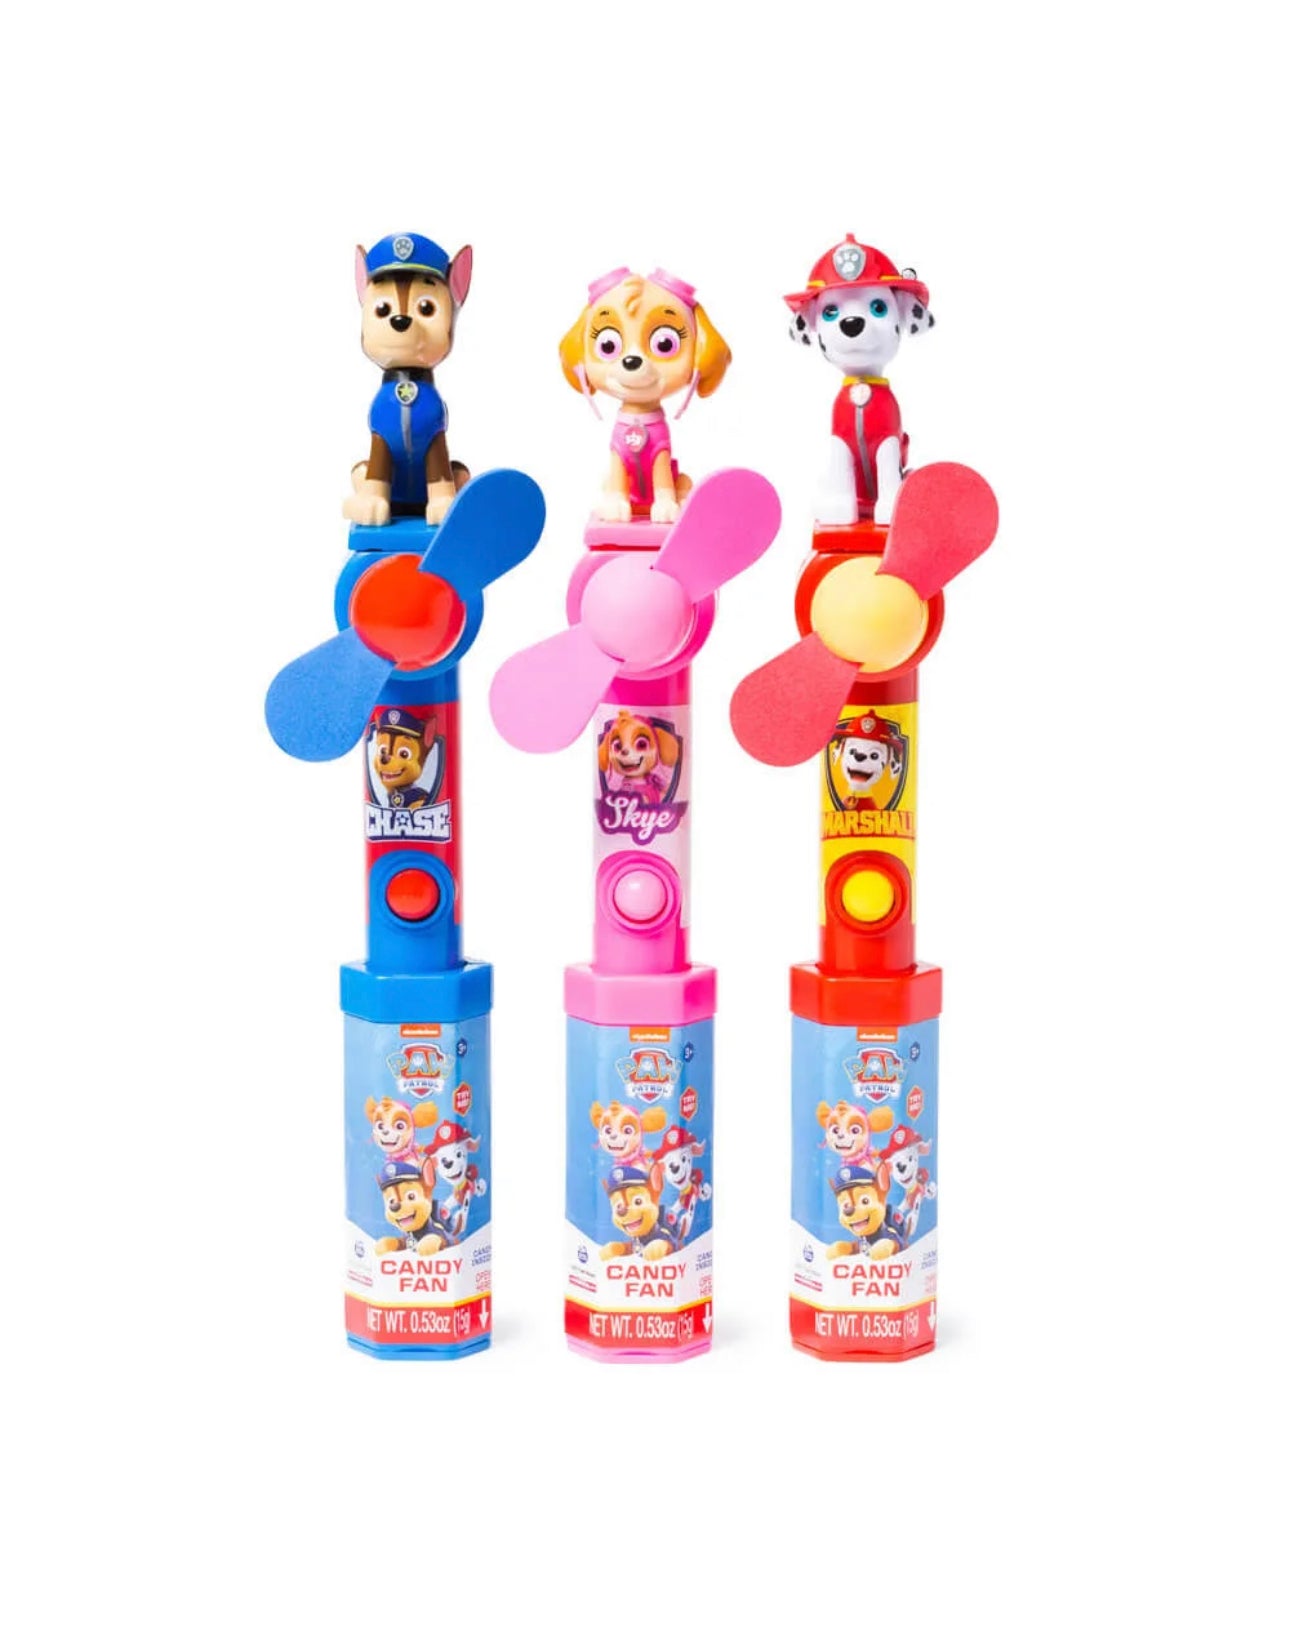 Paw Patrol Candy Fans (1 count)